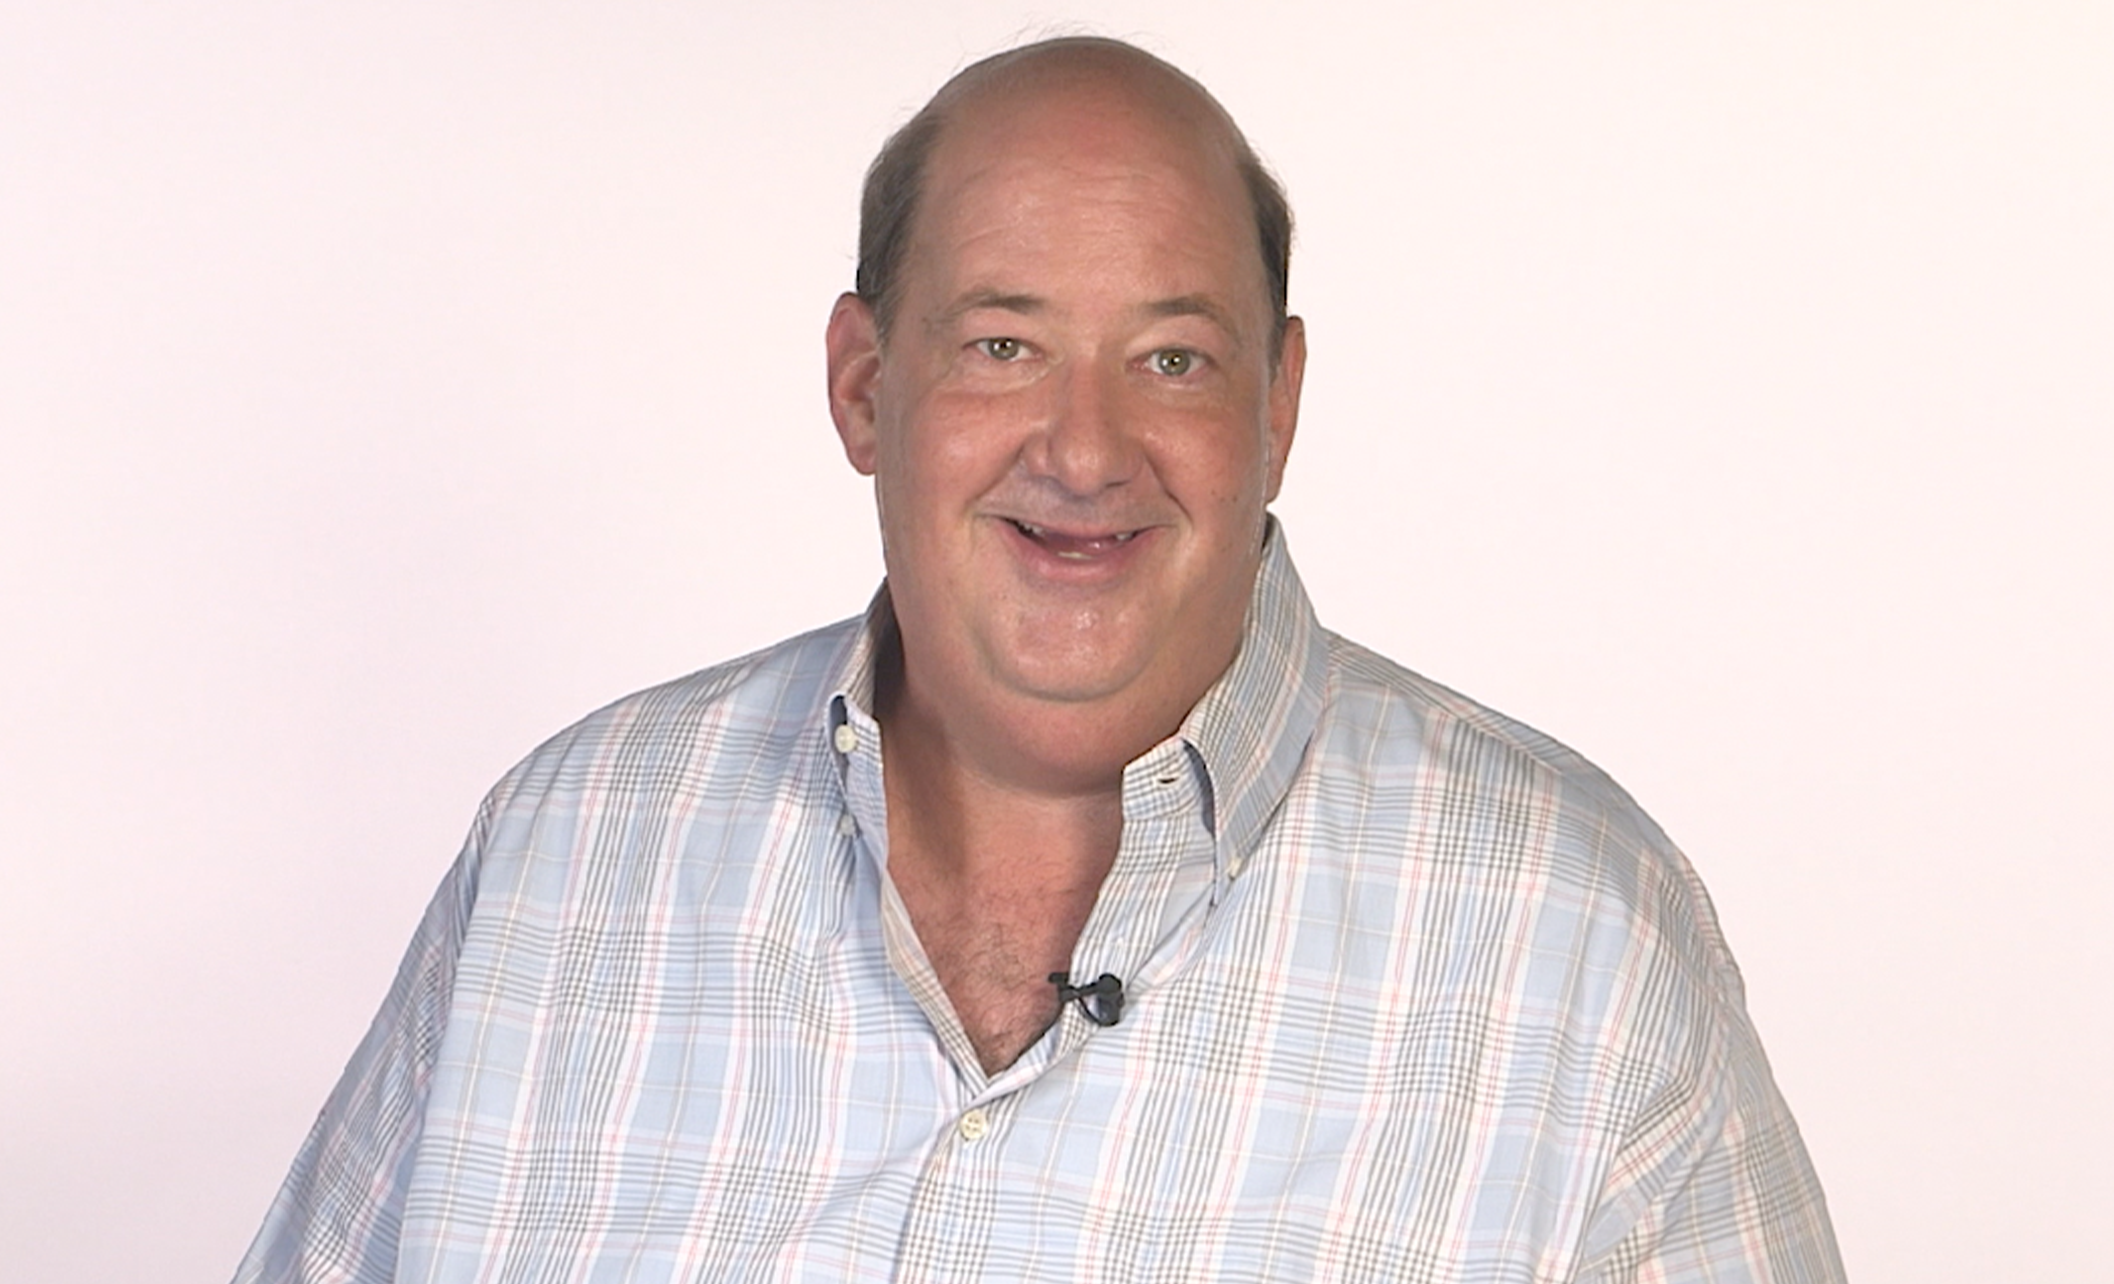 Brian Baumgartner on chili, The Office, and more